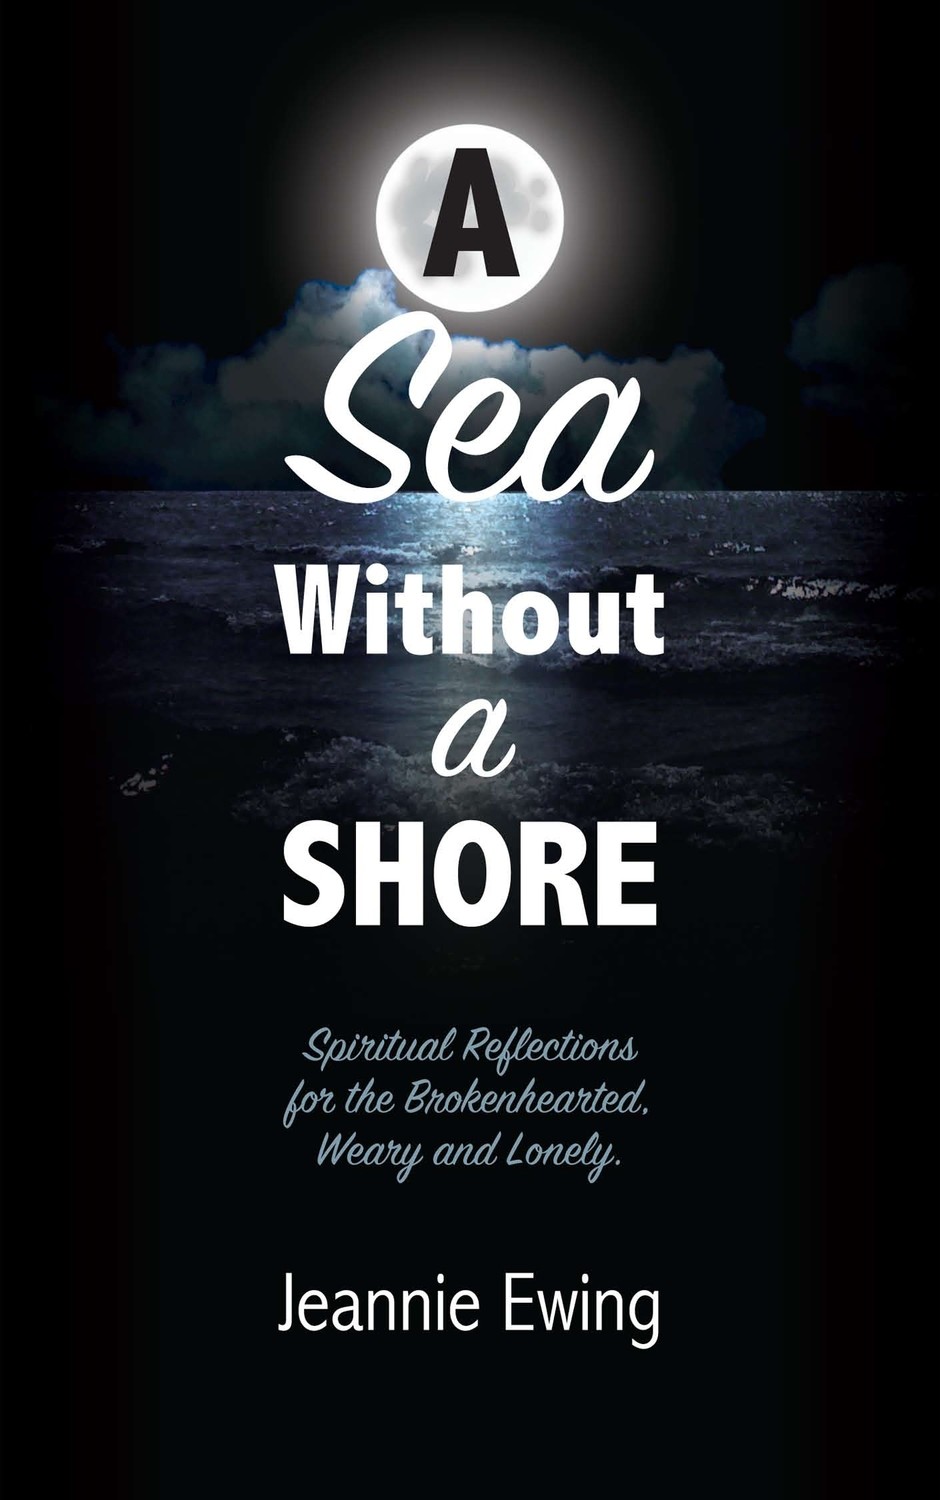 A Sea Without A Shore: Spiritual Reflections for the Brokenhearted, Weary, and Lonely